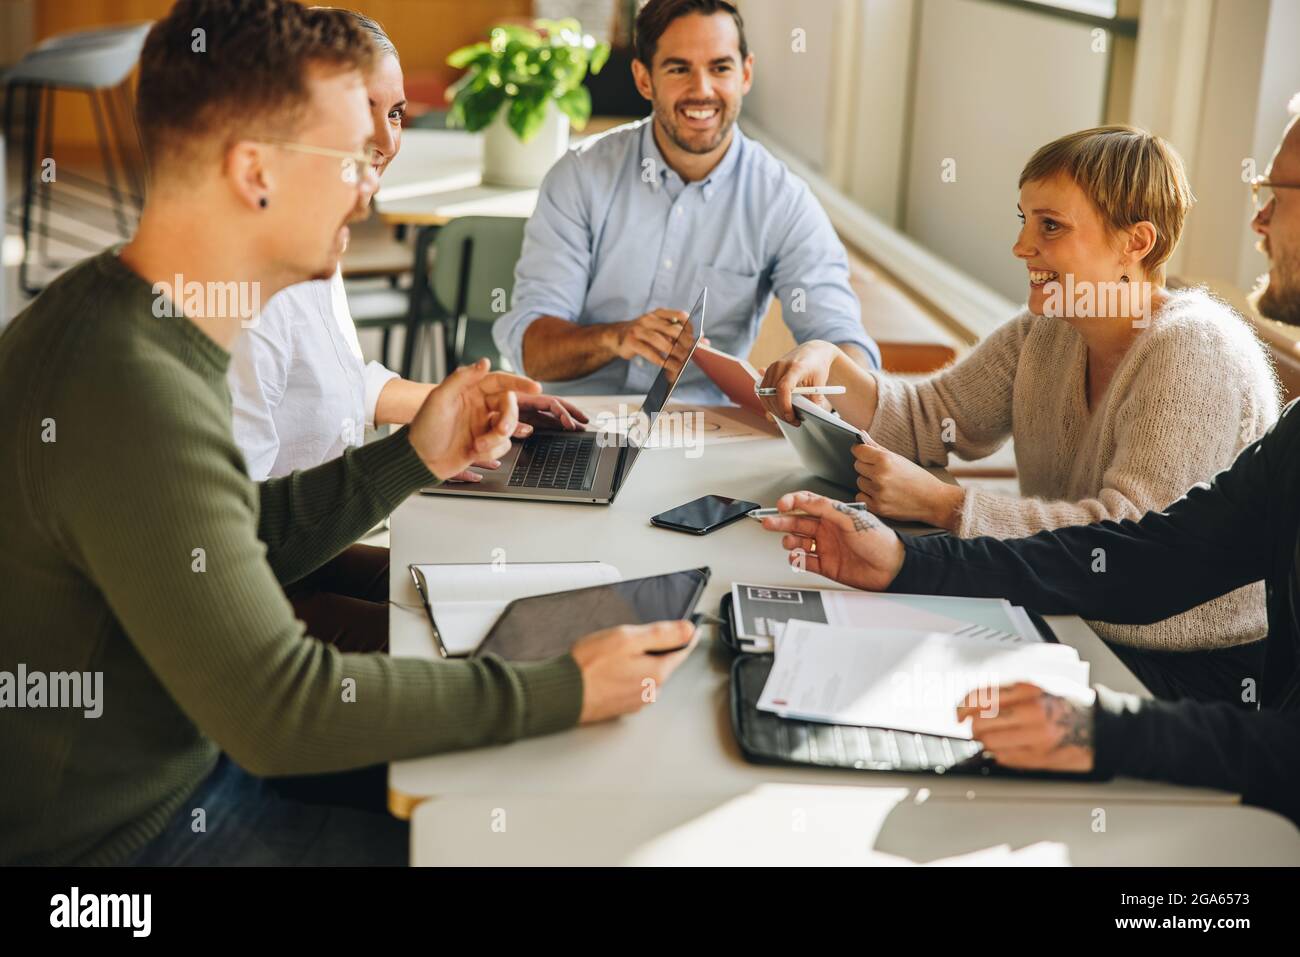 Executives in a meeting discussing on creative ideas.  Co-workers sitting at table having project meeting. Stock Photo